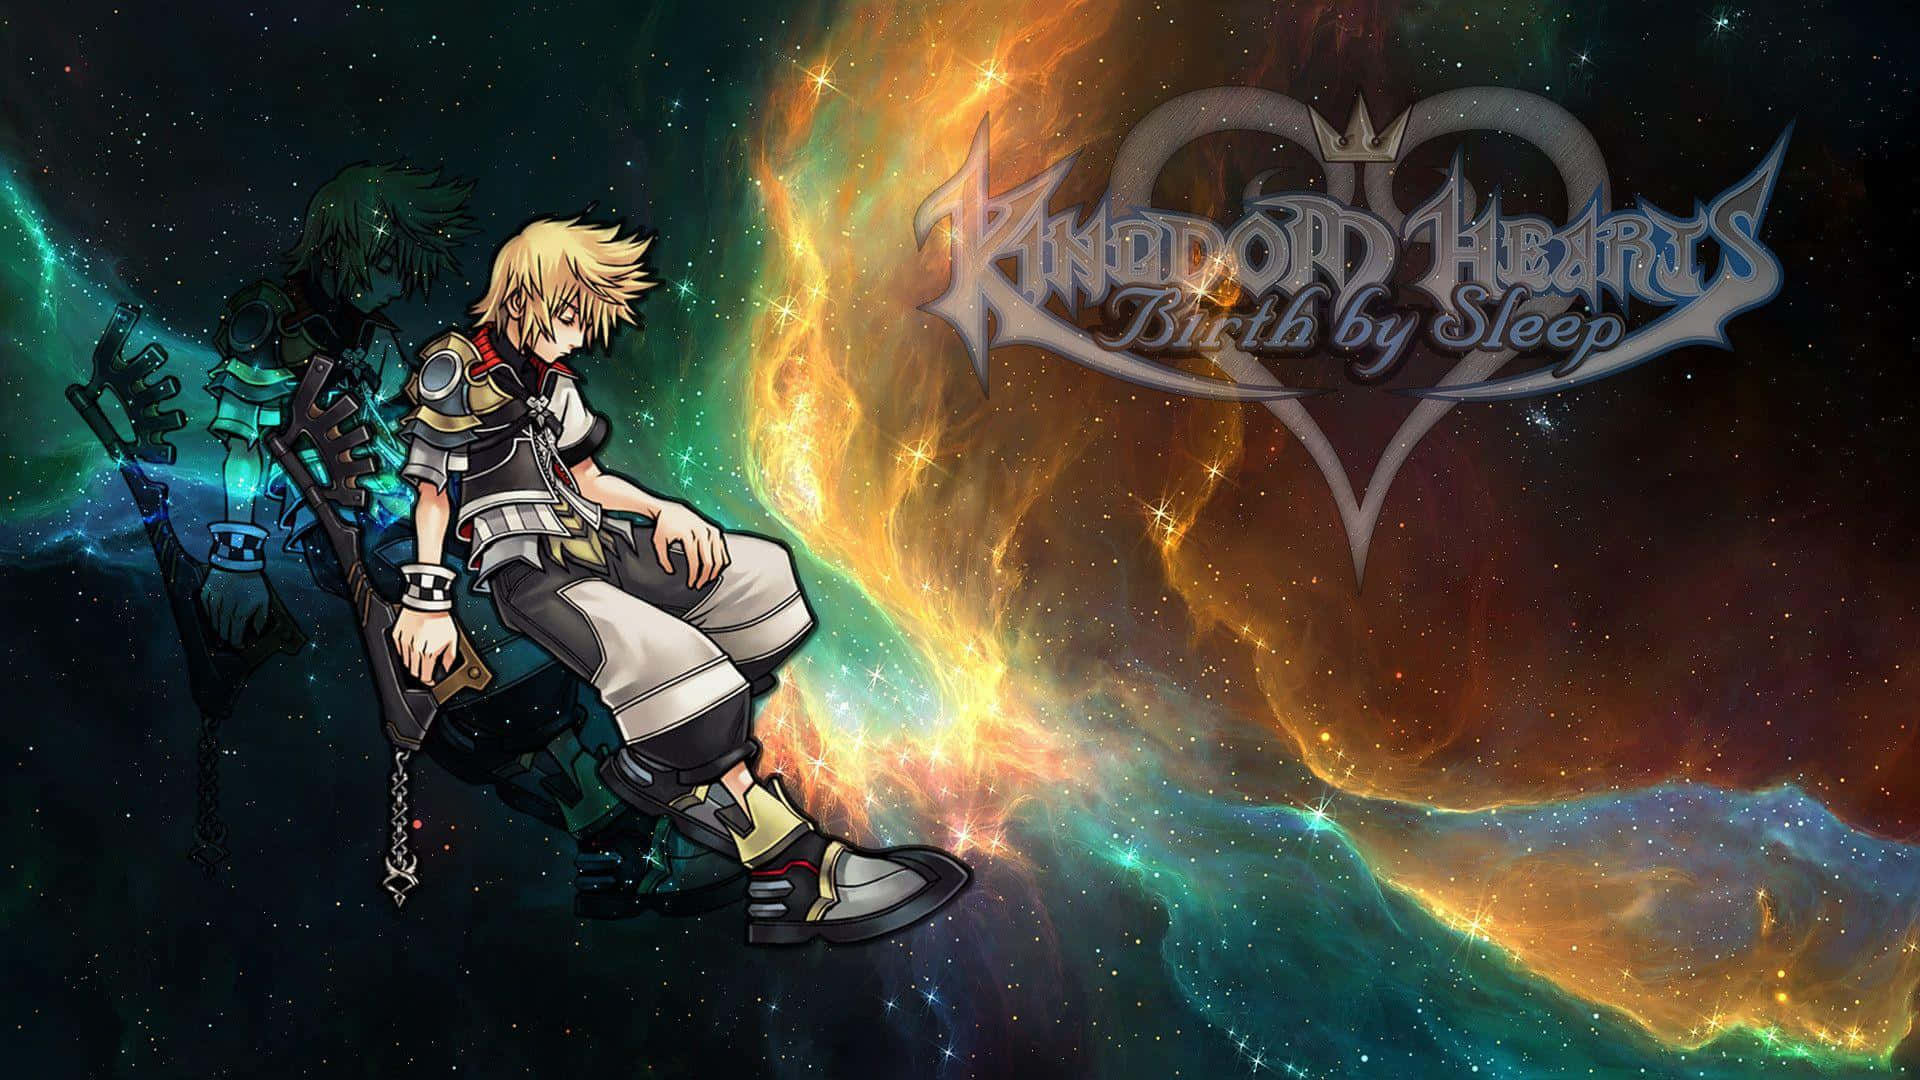 Sora, Donald, and Goofy in the magical world of Kingdom Hearts